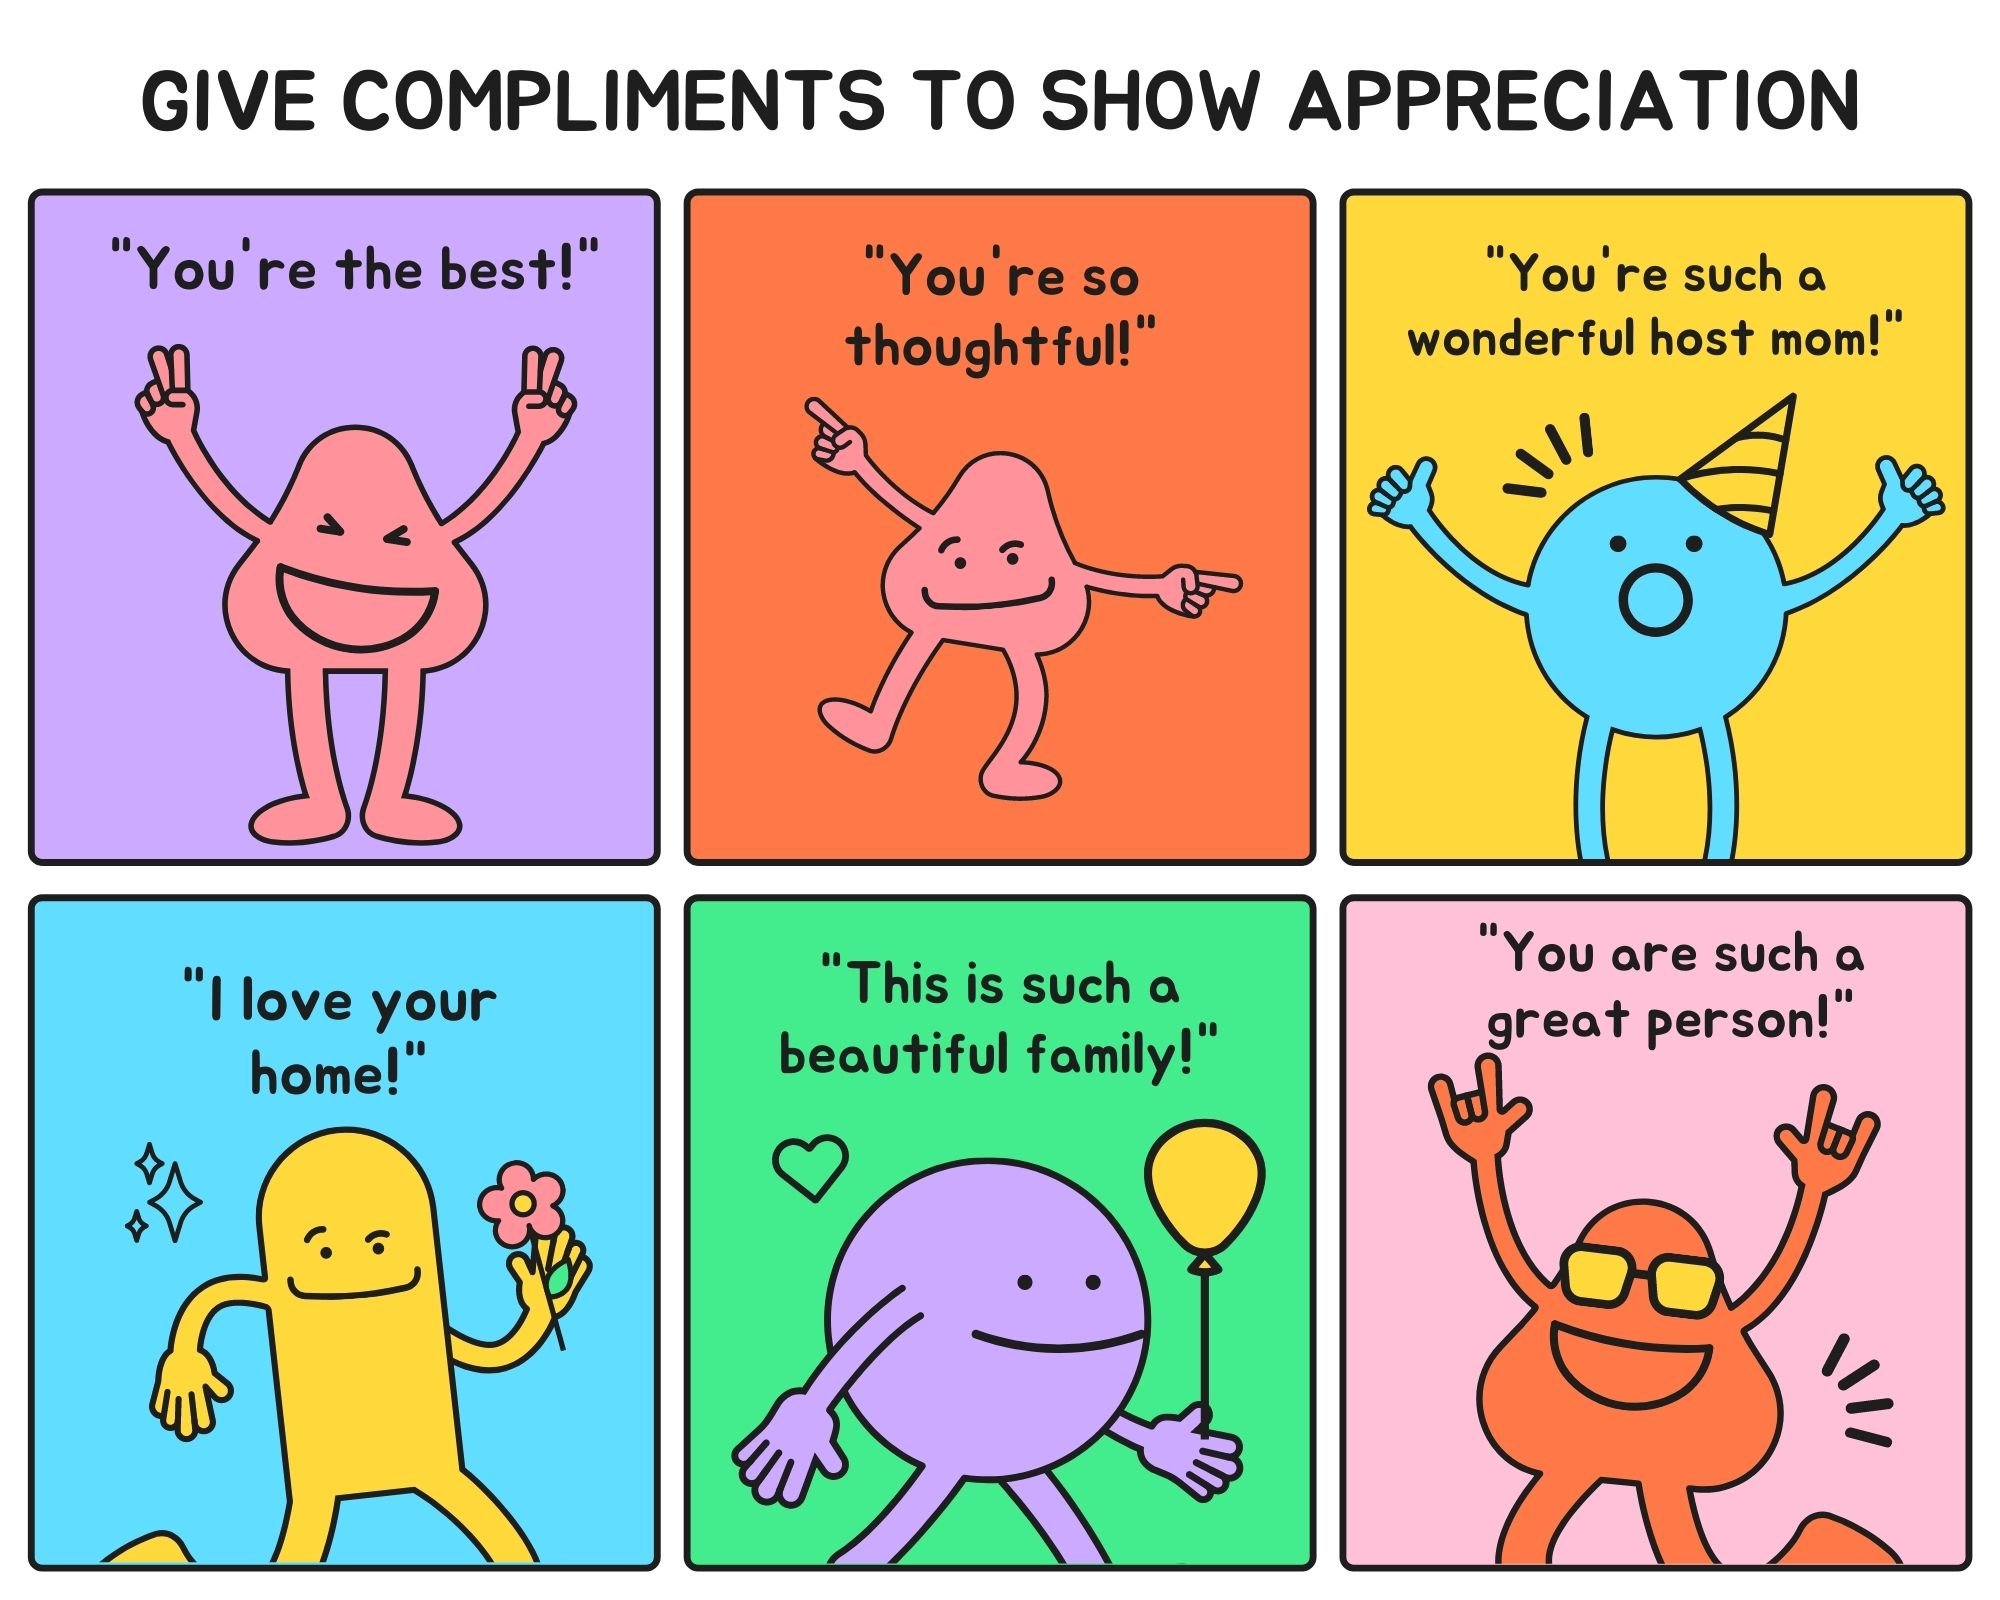 cartoon illustrating ways to give compliments in the USA to show appreciation